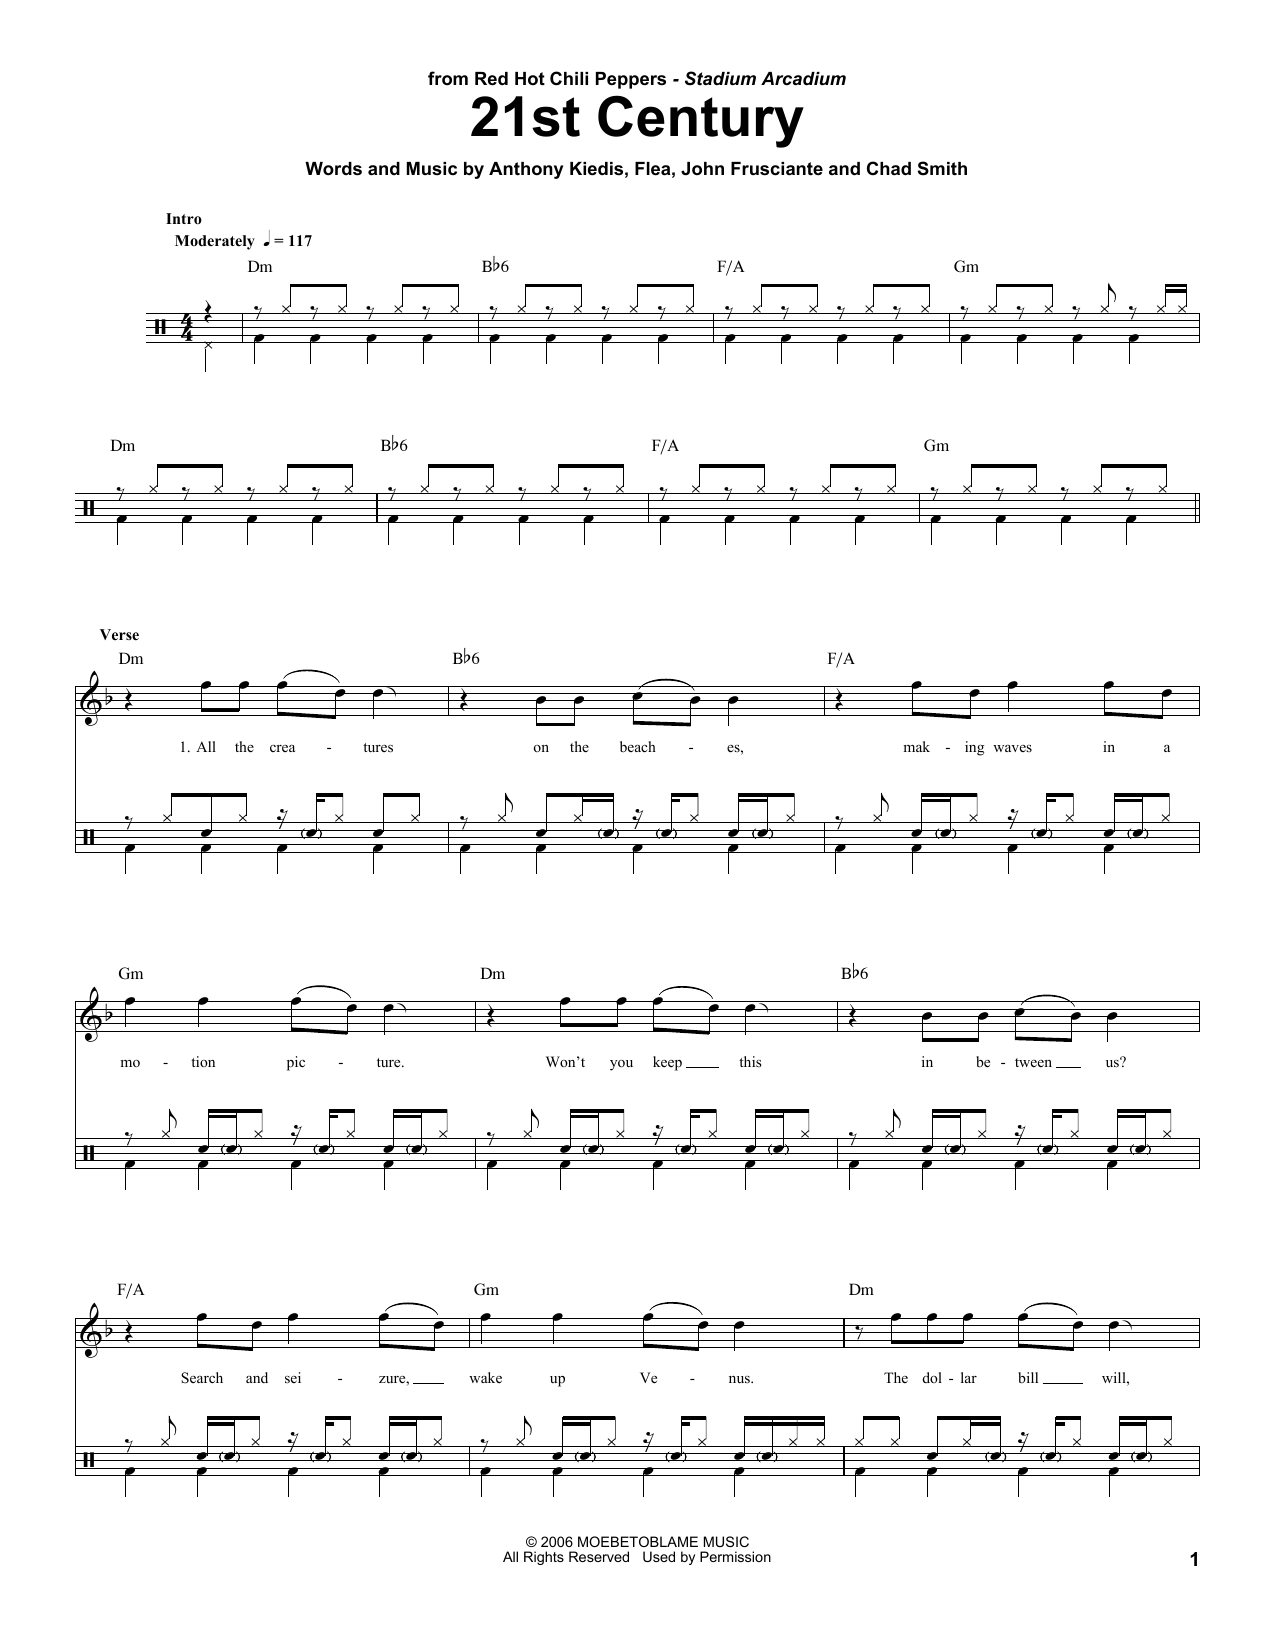 Download Red Hot Chili Peppers 21st Century Sheet Music